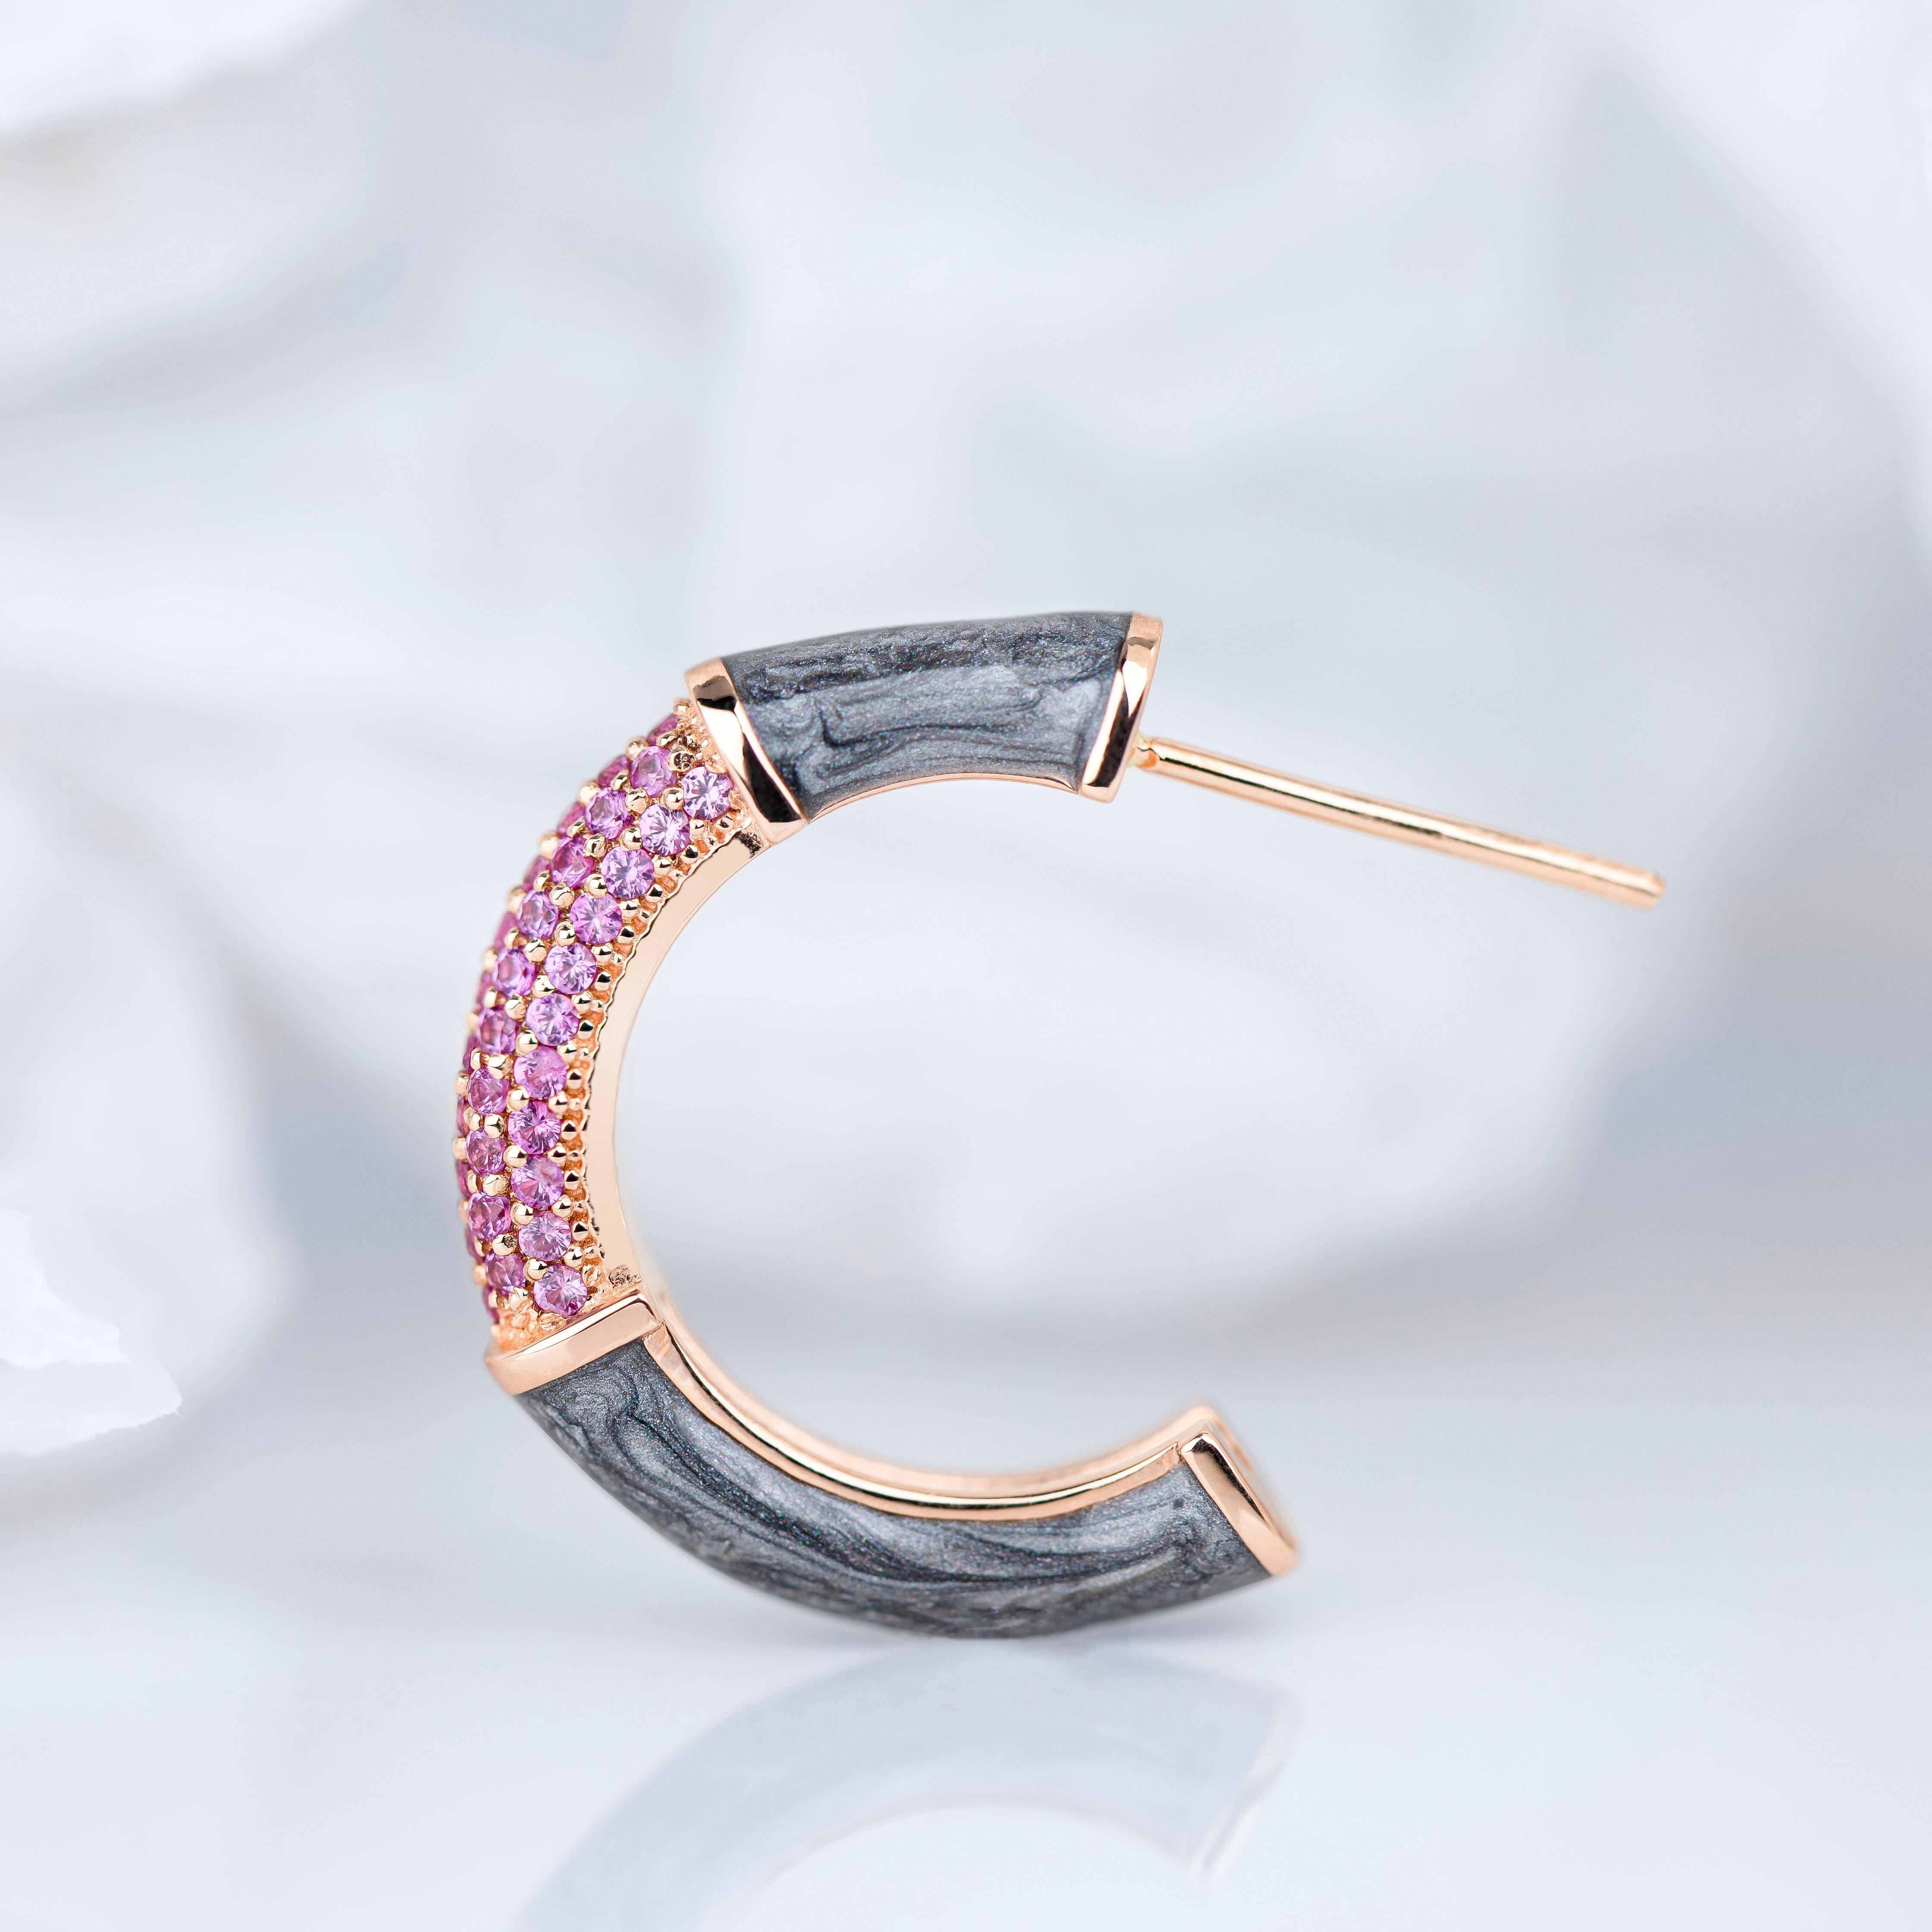 Art Deco Style Gold Earring with Pink Sapphire Stone, Bumble Colors Earring

This ring was made with quality materials and excellent handwork. I guarantee the quality assurance of my handwork and materials. It is vital for me that you are totally